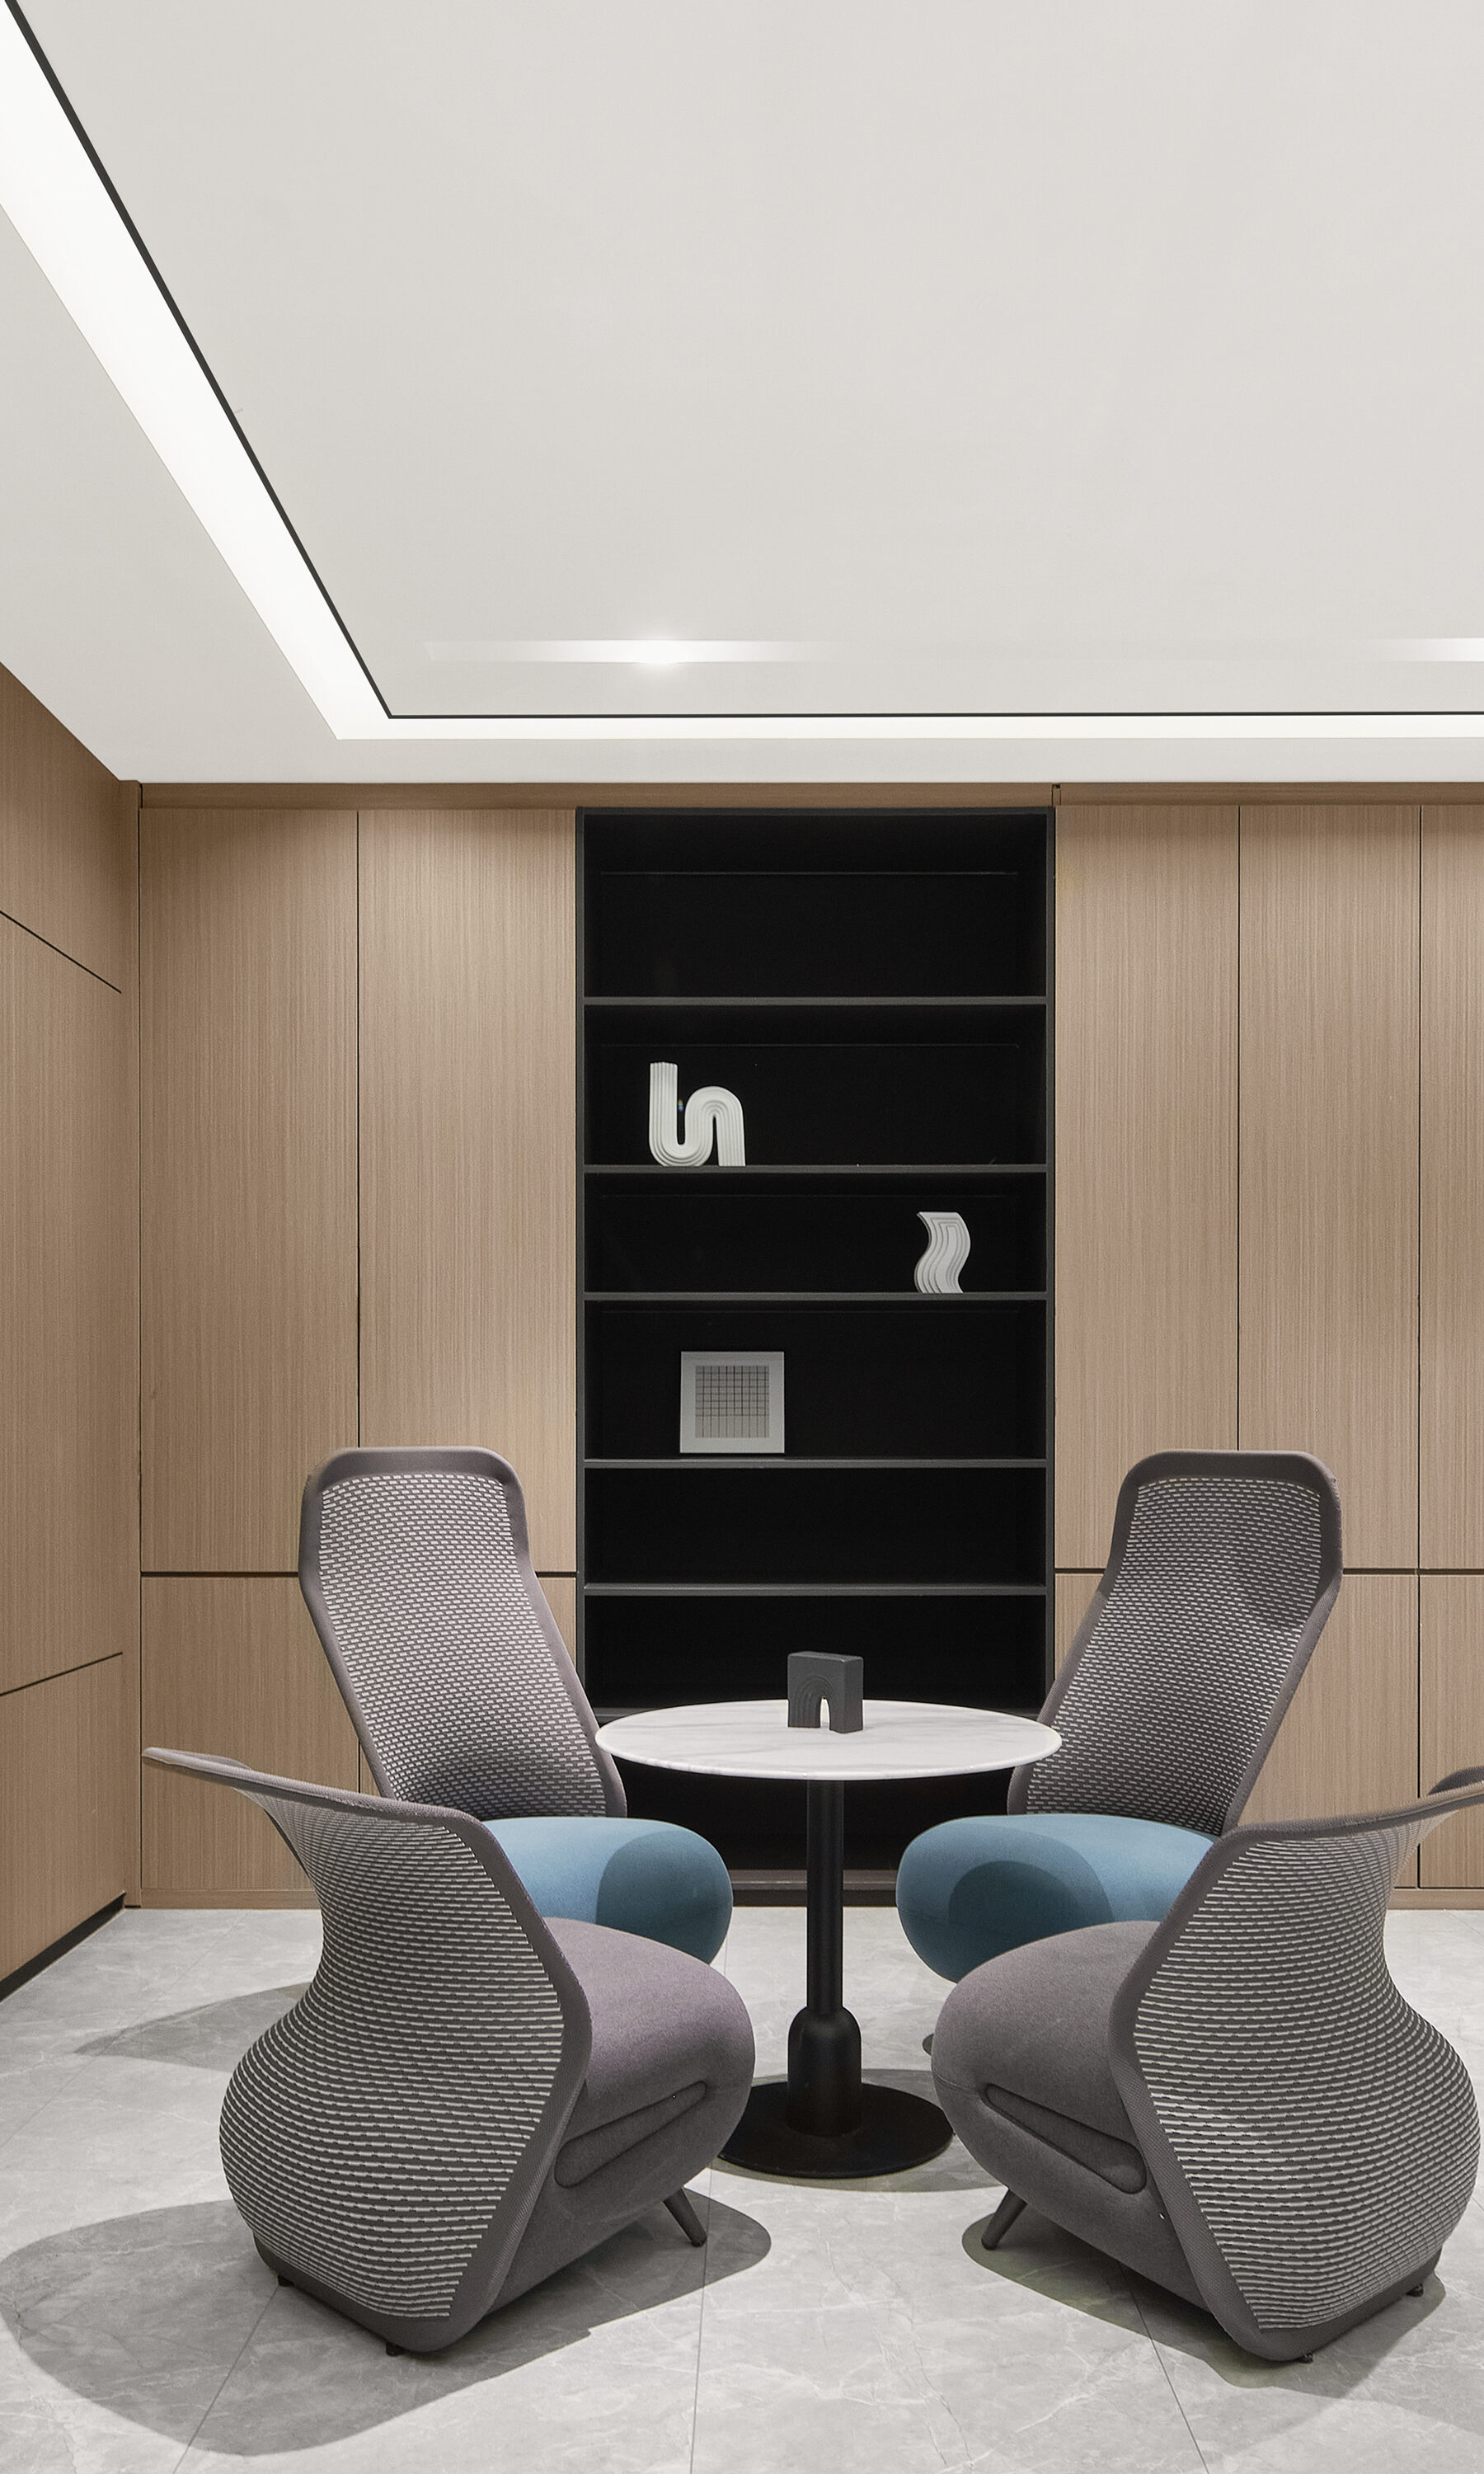 Workspace Furnishing for ZC Group